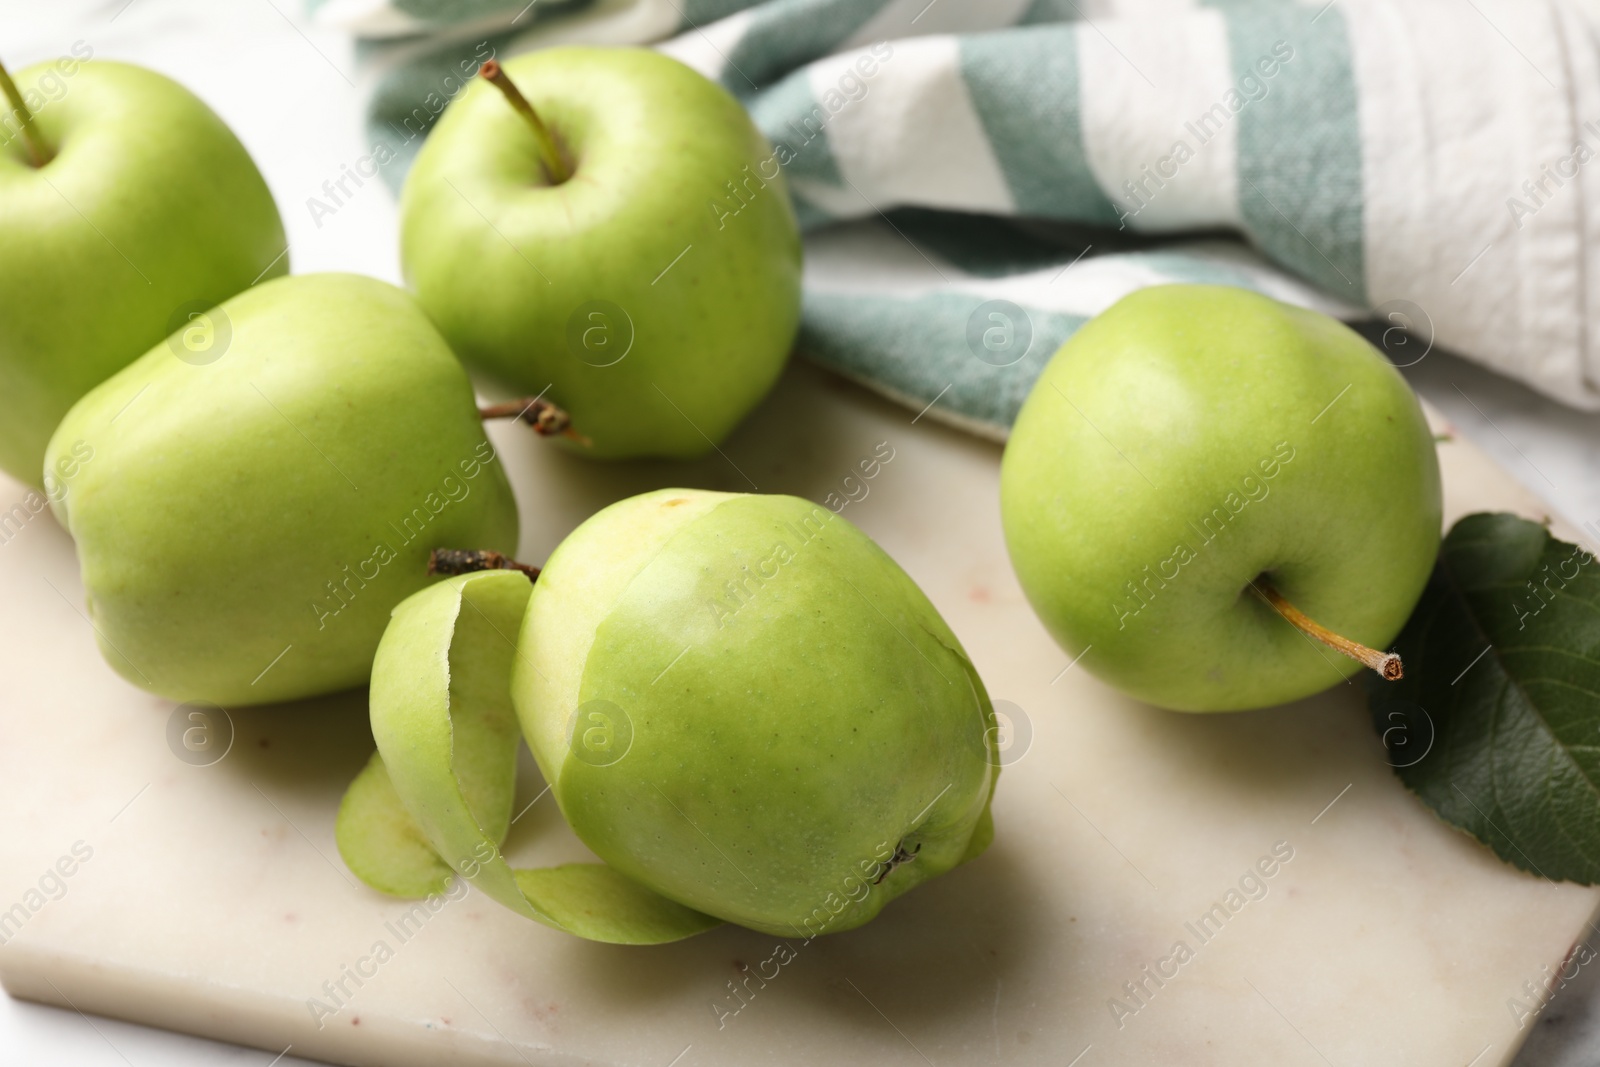 Photo of Ripe green apples on table, closeup view